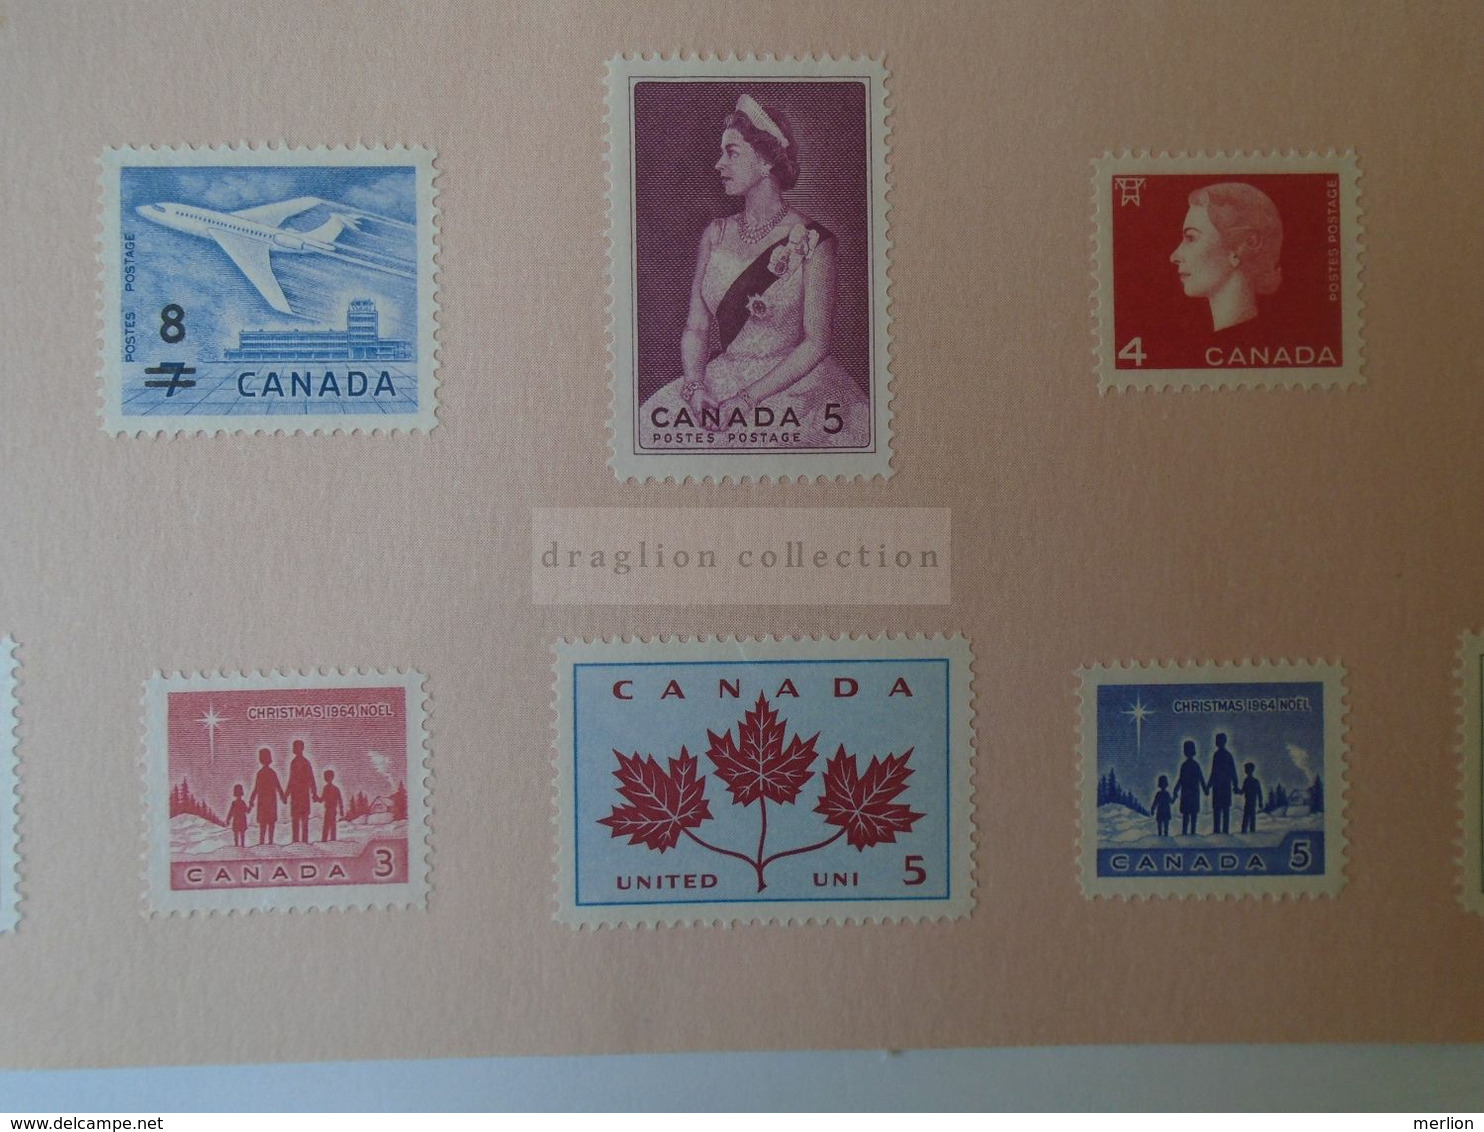 J1218   Canada 1964  Lot Of  2  Souvenir Cards  With Stamps Attached   1964/65 - Pochettes Postales Annuelles